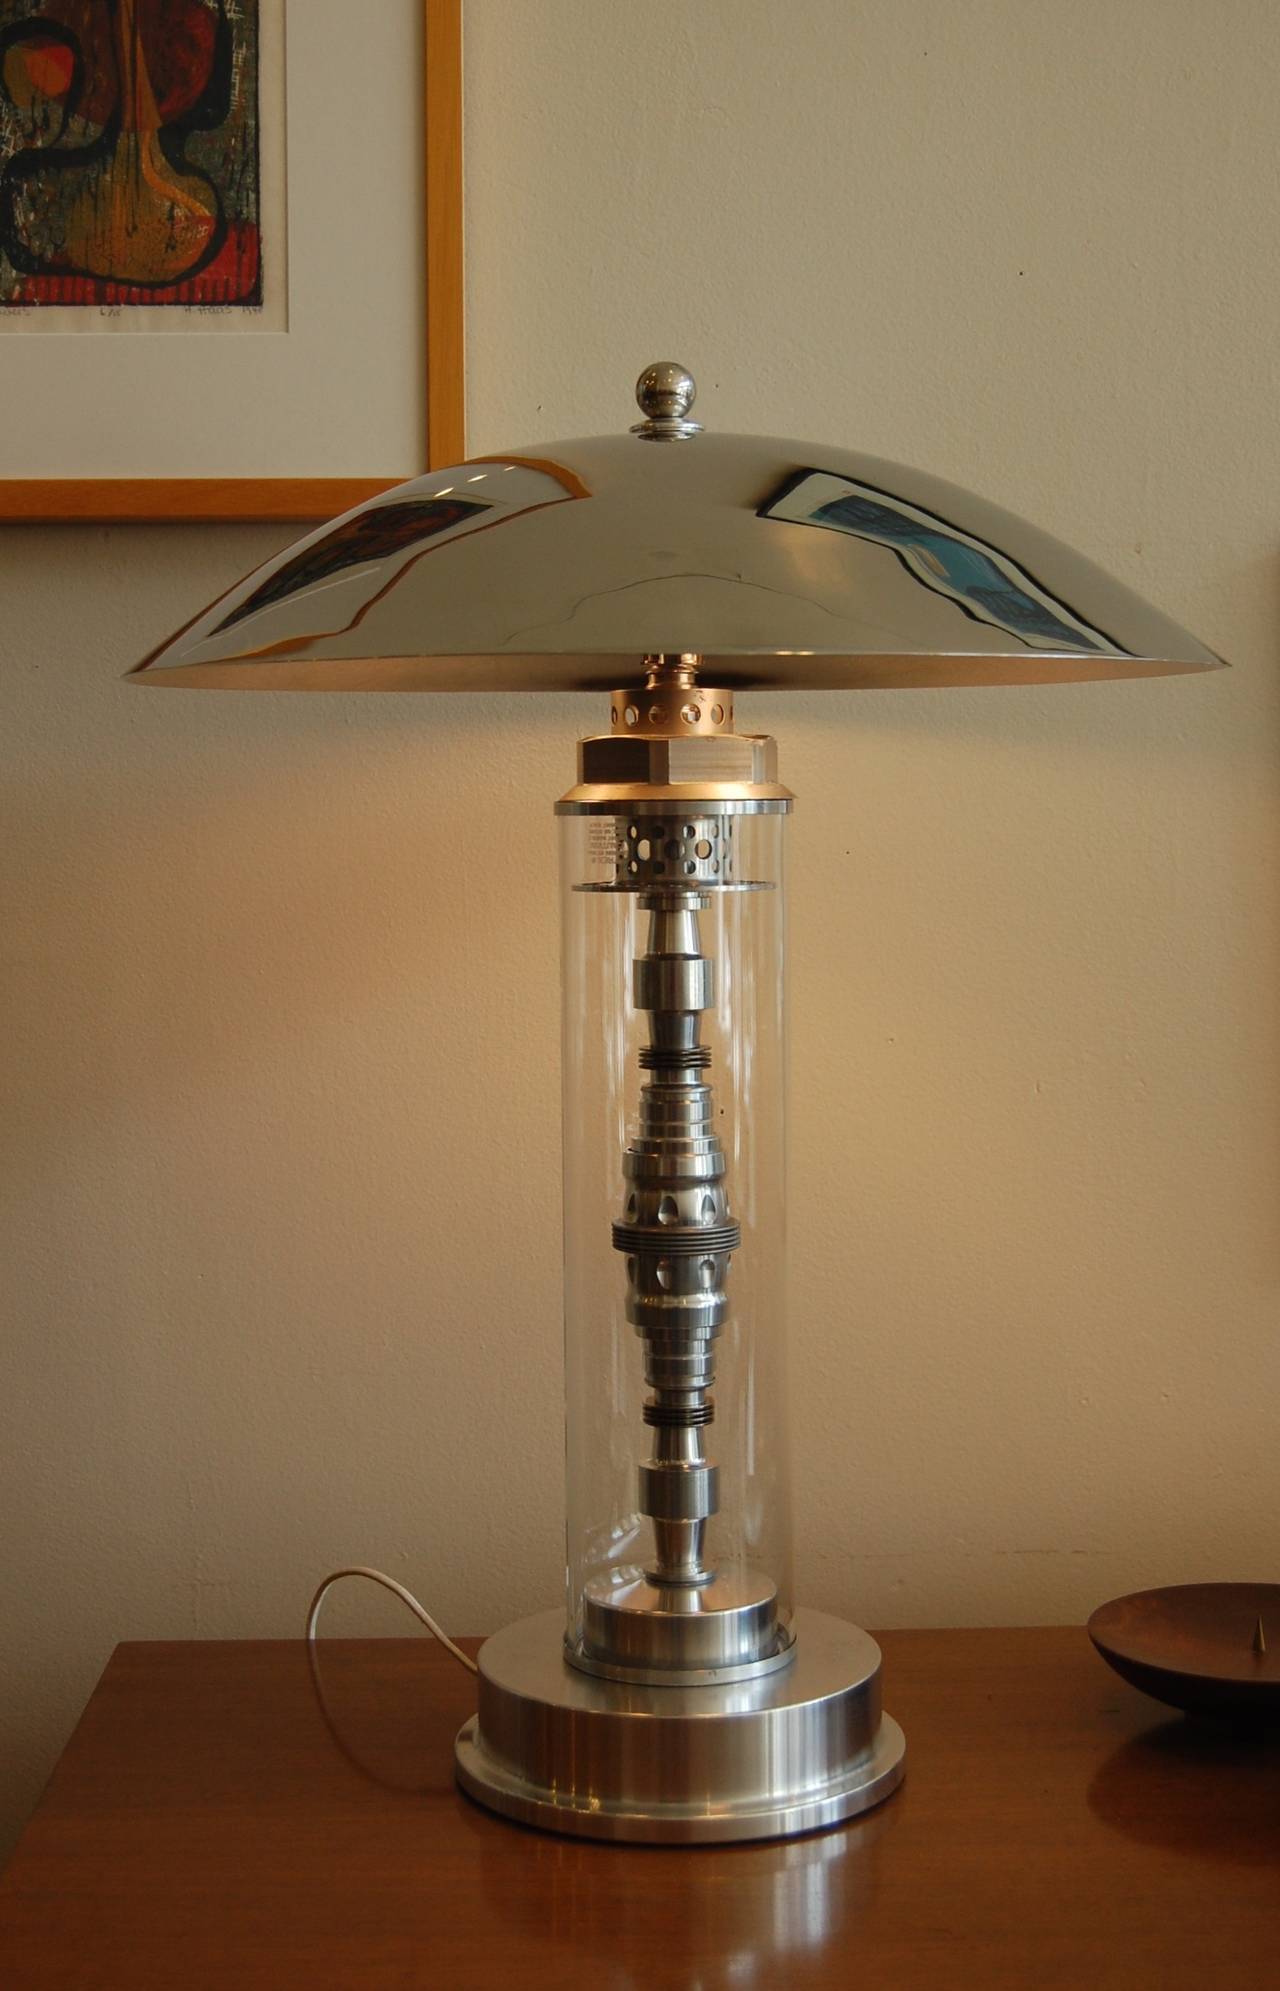 Created in the 1980s from found Industrial parts, such as a 1950s jet engine injector and a Pyrex glass cylinder is this Machine Age inspired table lamp. The shade is a heavy chrome saucer, a wonderful example of vintage assemblage in lighting.